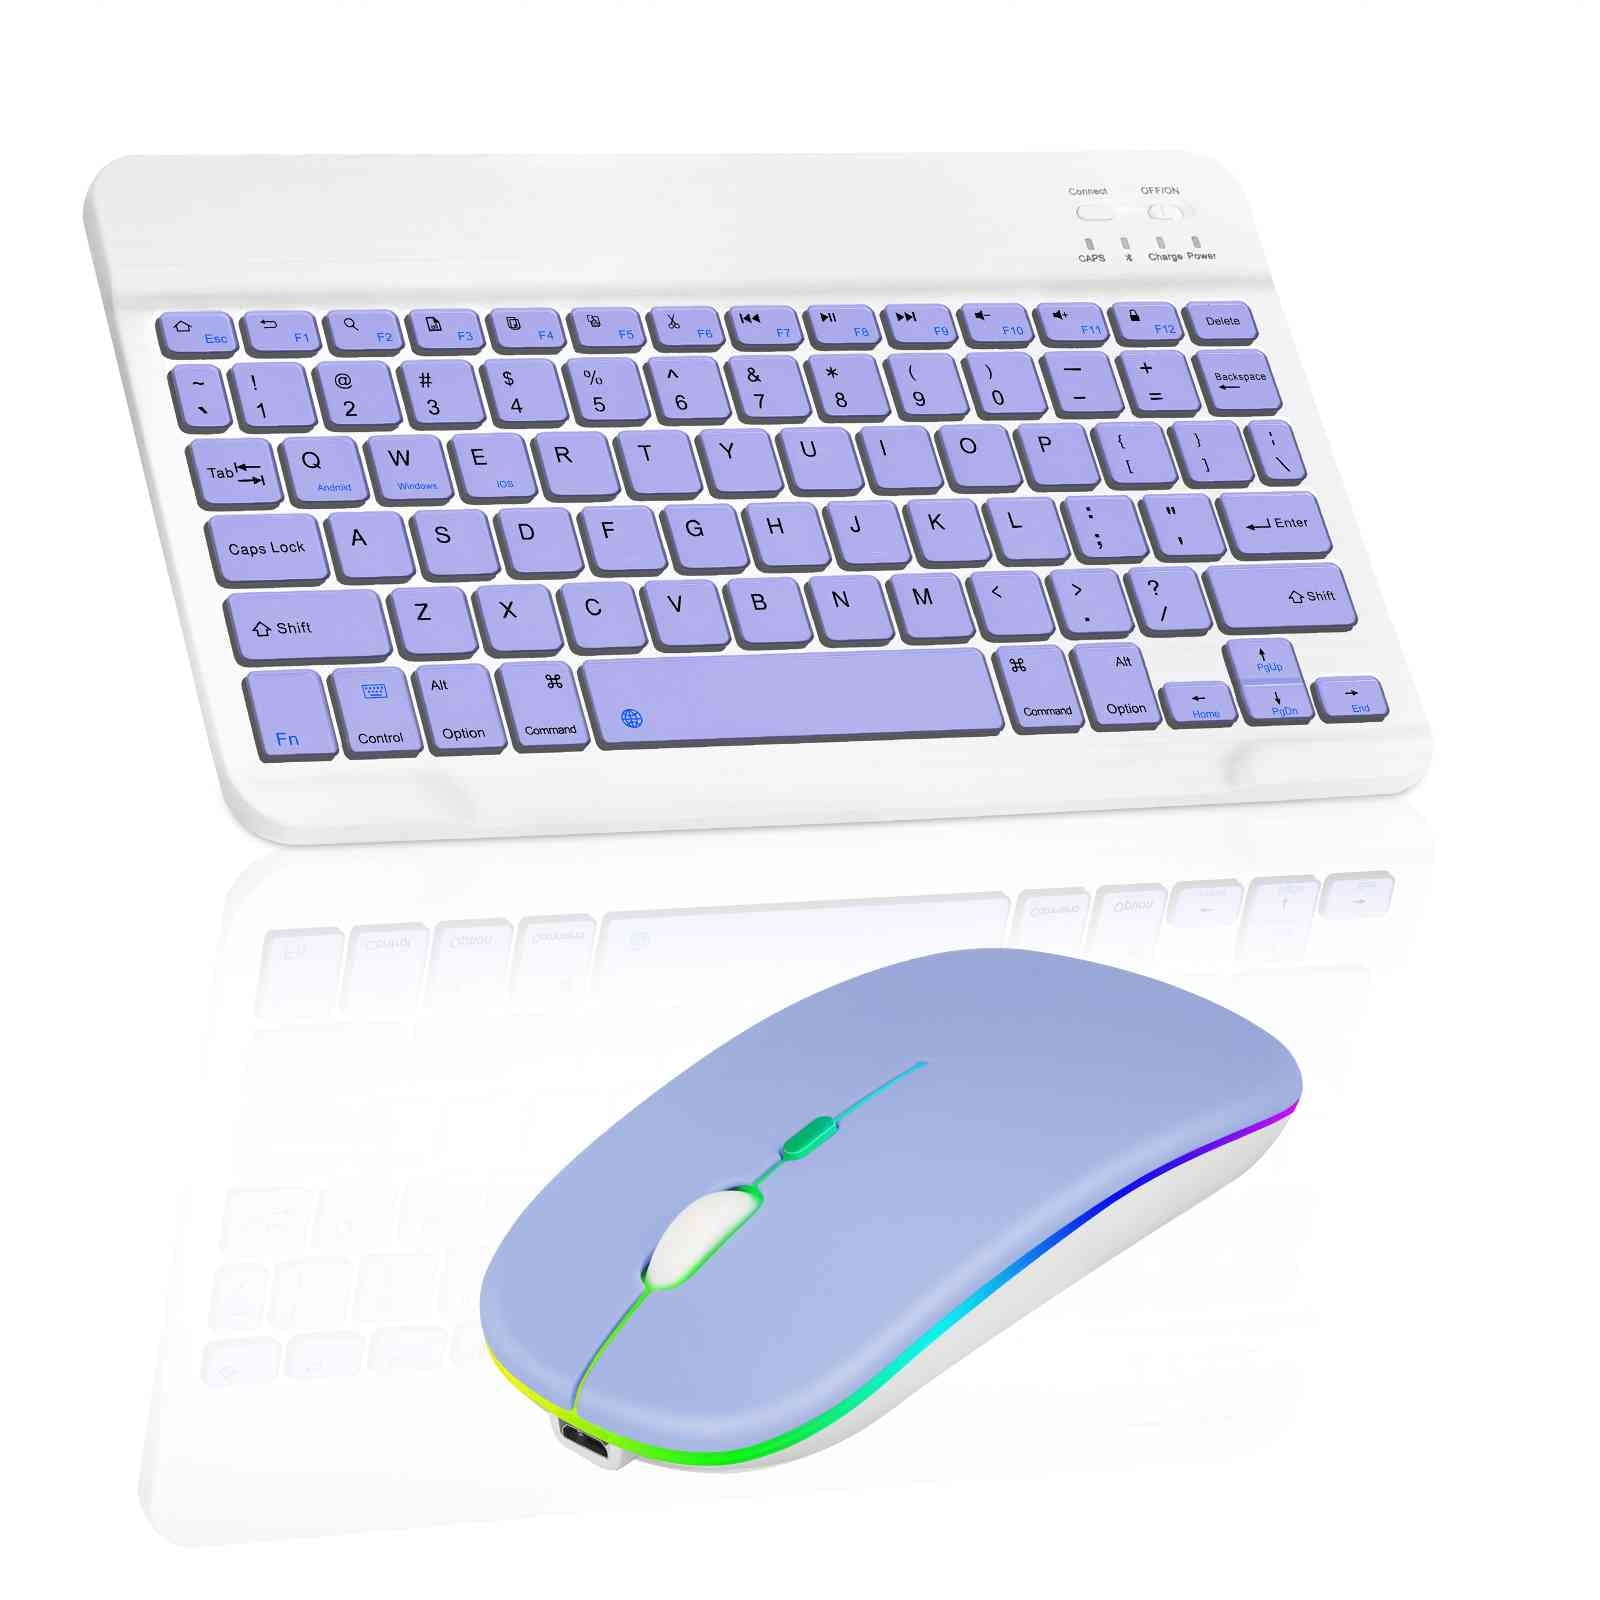 Rechargeable Bluetooth Keyboard and Mouse Combo Ultra Slim for Zenpad Z8s ZT582KL and All Bluetooth Enabled Android/PC-Lavender Purple Keyboard with RGB LED Lavender Purple Mouse